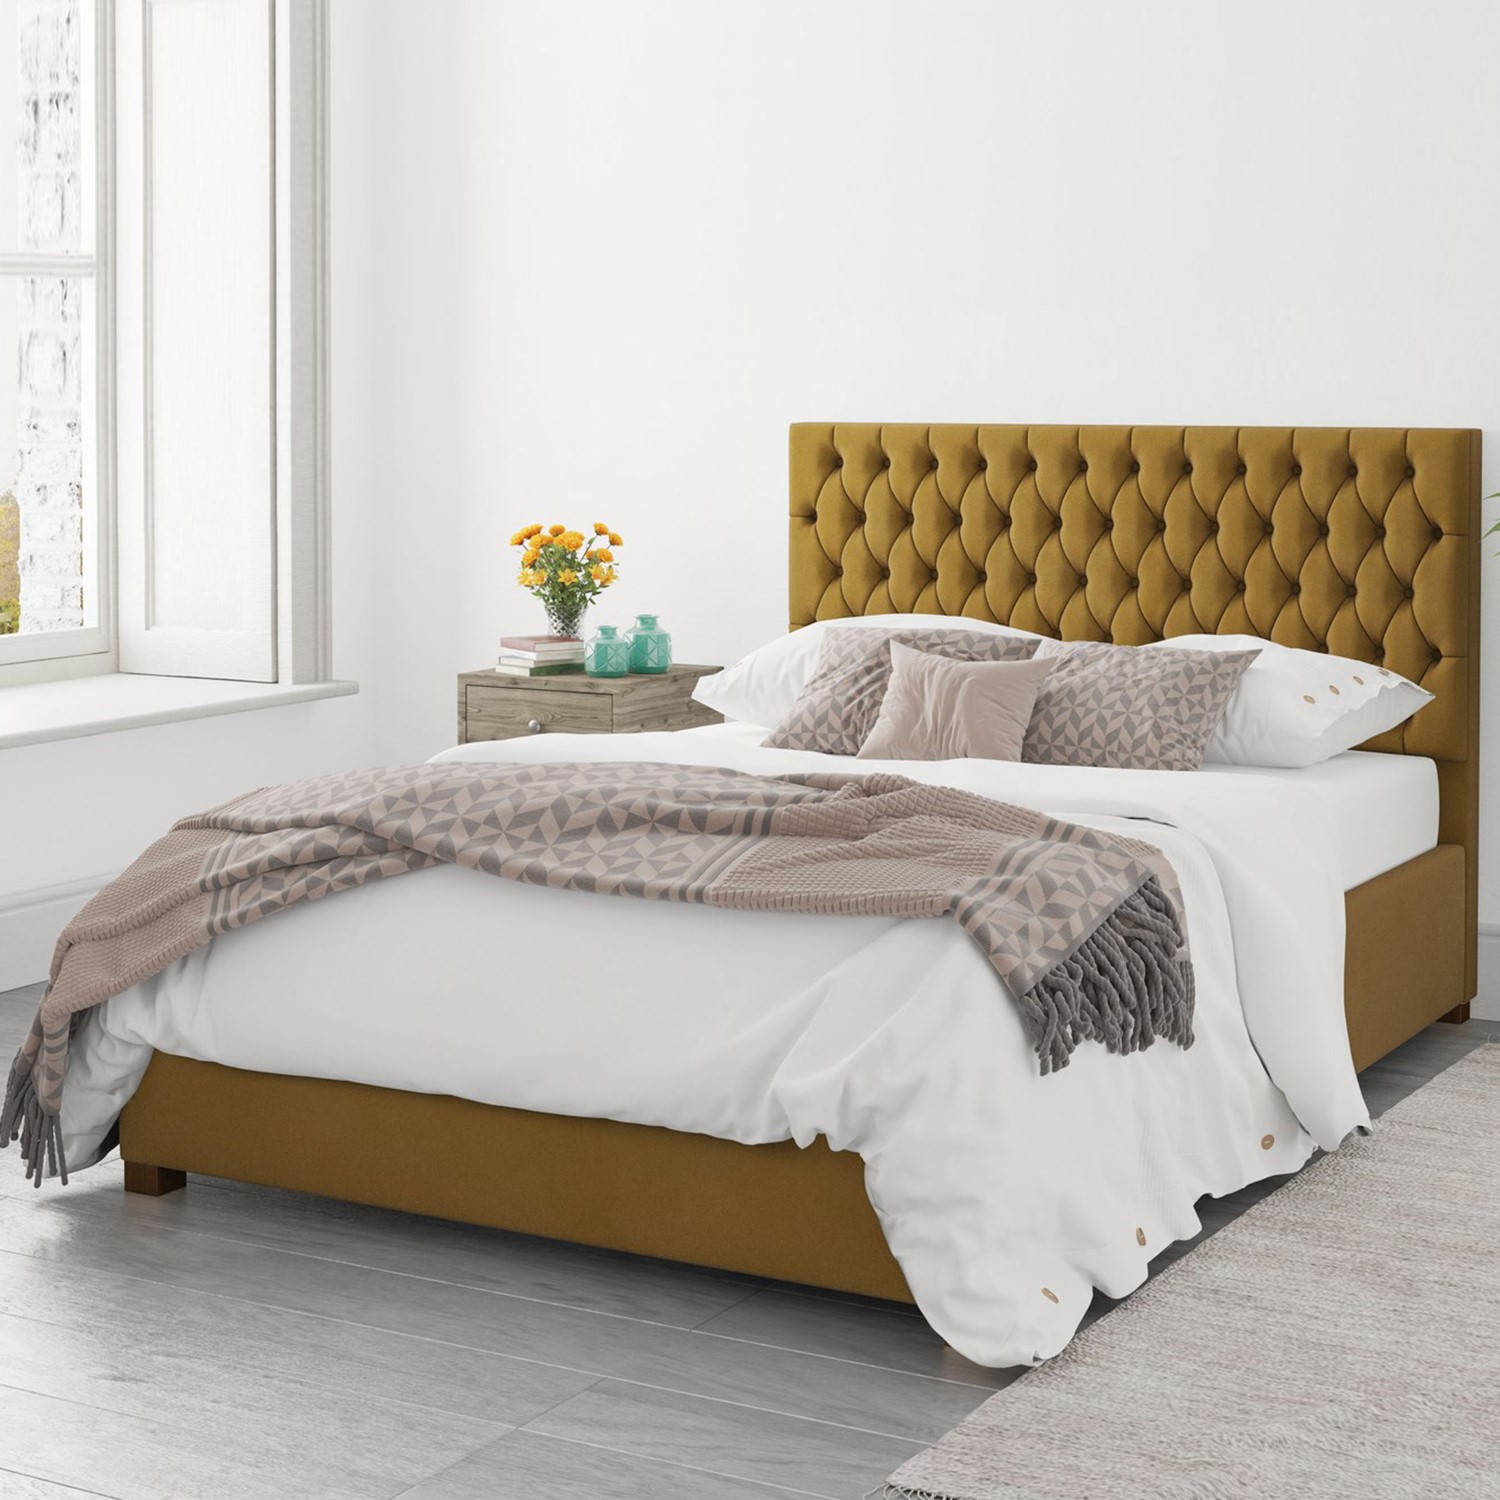 Read more about Mustard velvet king size ottoman bed angel aspire